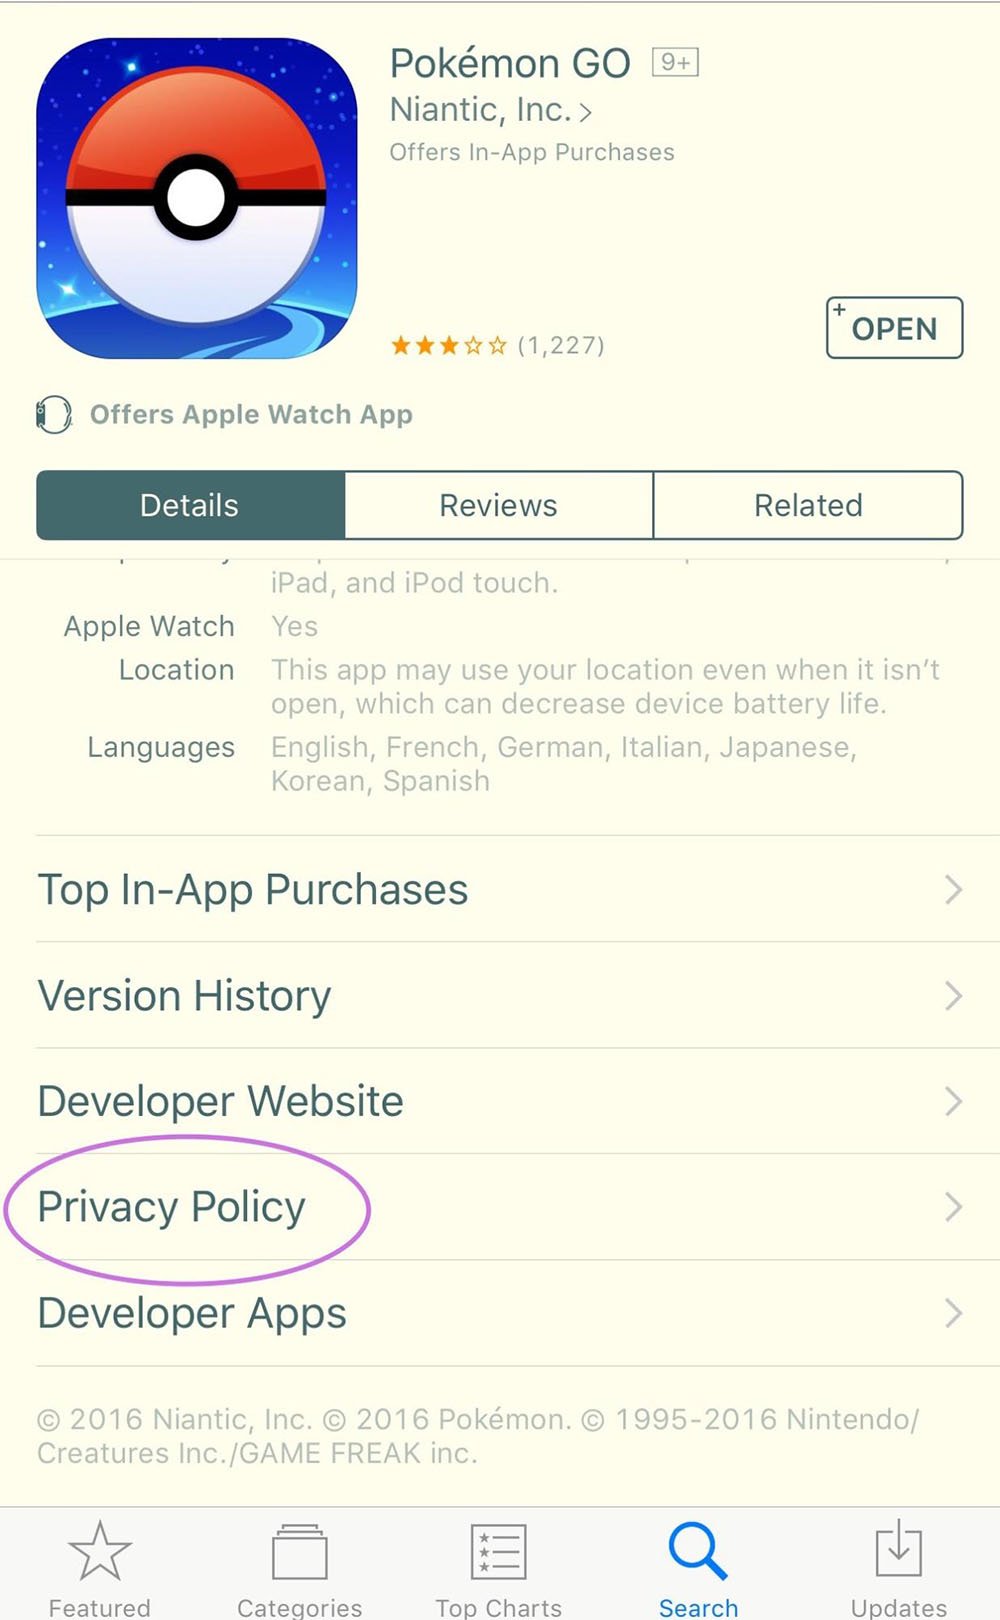 Pokemon GO mobile game App Store profile page: Privacy Policy link